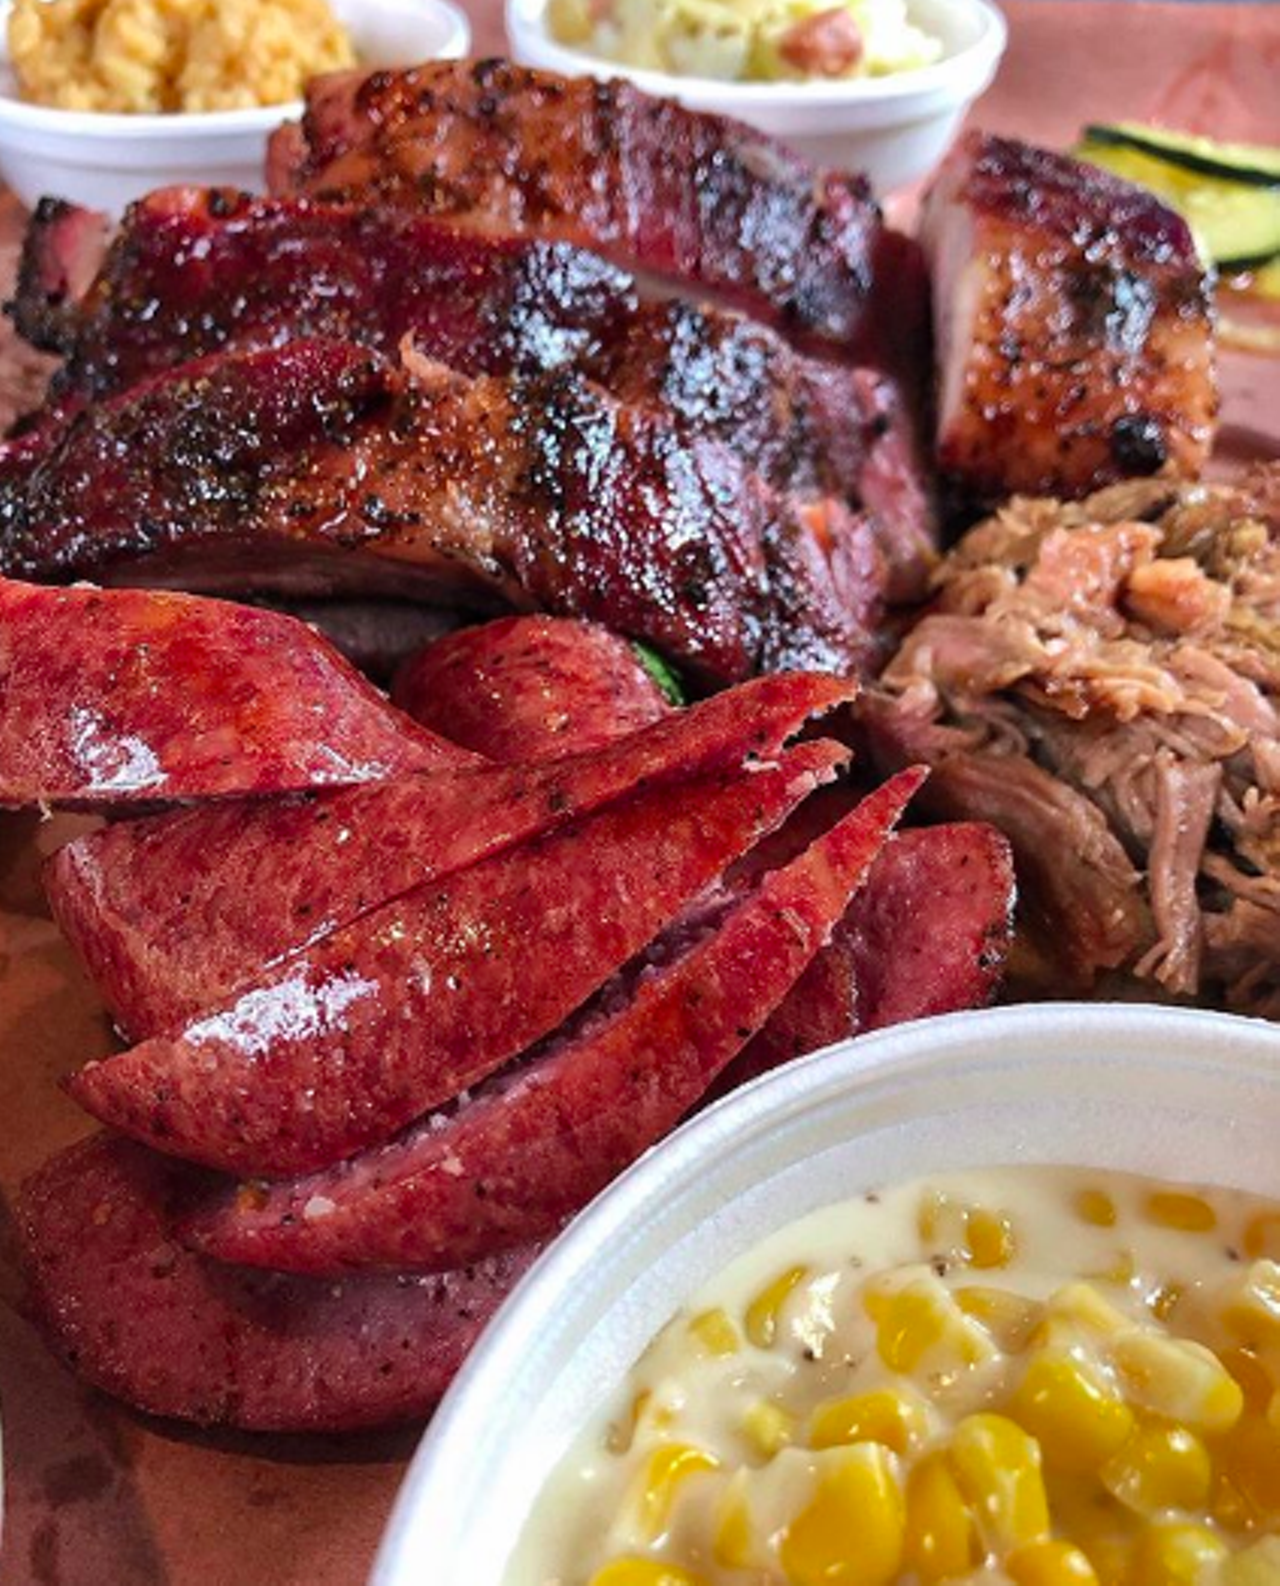 Burnwood '68
1012 N Flores St, (210) 320-0584, burnwood68.com
On top of a badass name, Burnwood ‘68 should definitely be respected for the barbecue it serves up. Opened in 2018, pitmaster Lupe is a third generation smoker who serves up specialty items like brisket grilled cheese and chopped Frito pie, as well as smoked meats by the pound and sandwiches. There’s also lots of potato options here, from the German potatoes and cheesy potatoes to the potato salad and loaded baked potato.
Photo via Instagram / egg_34